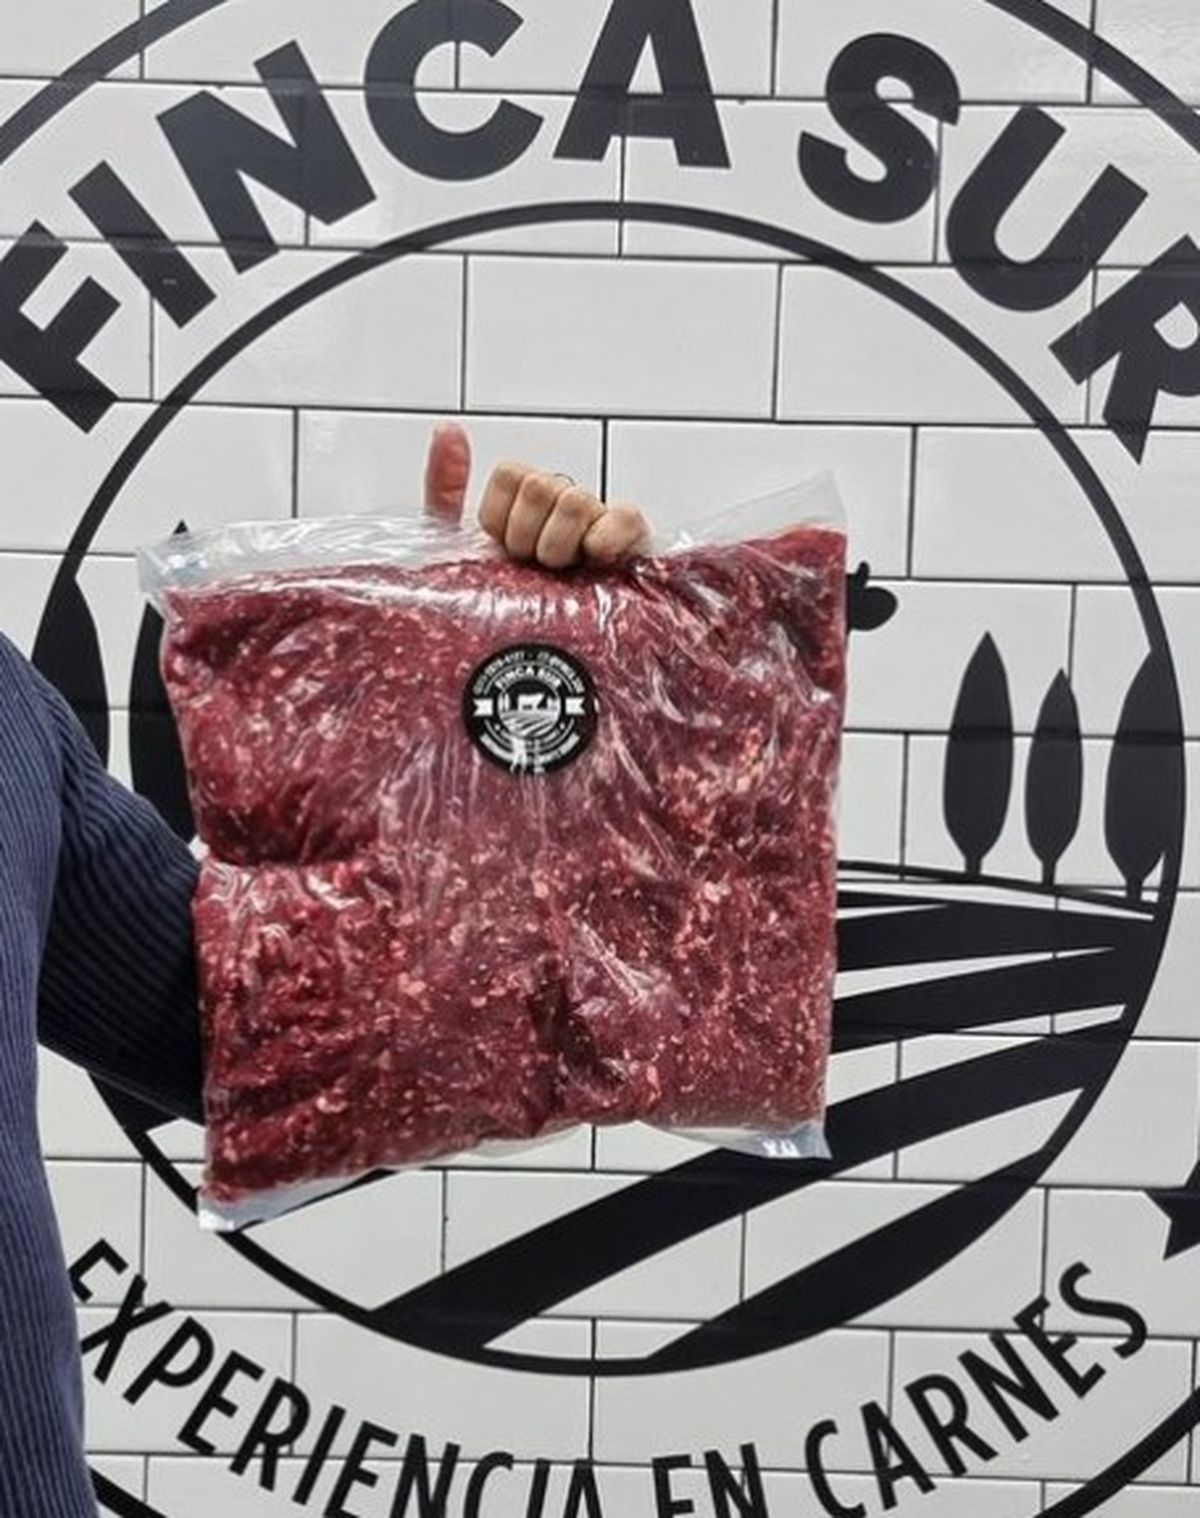 The new trend of "premium butcher shops" is already gaining a foothold in this area: How business works